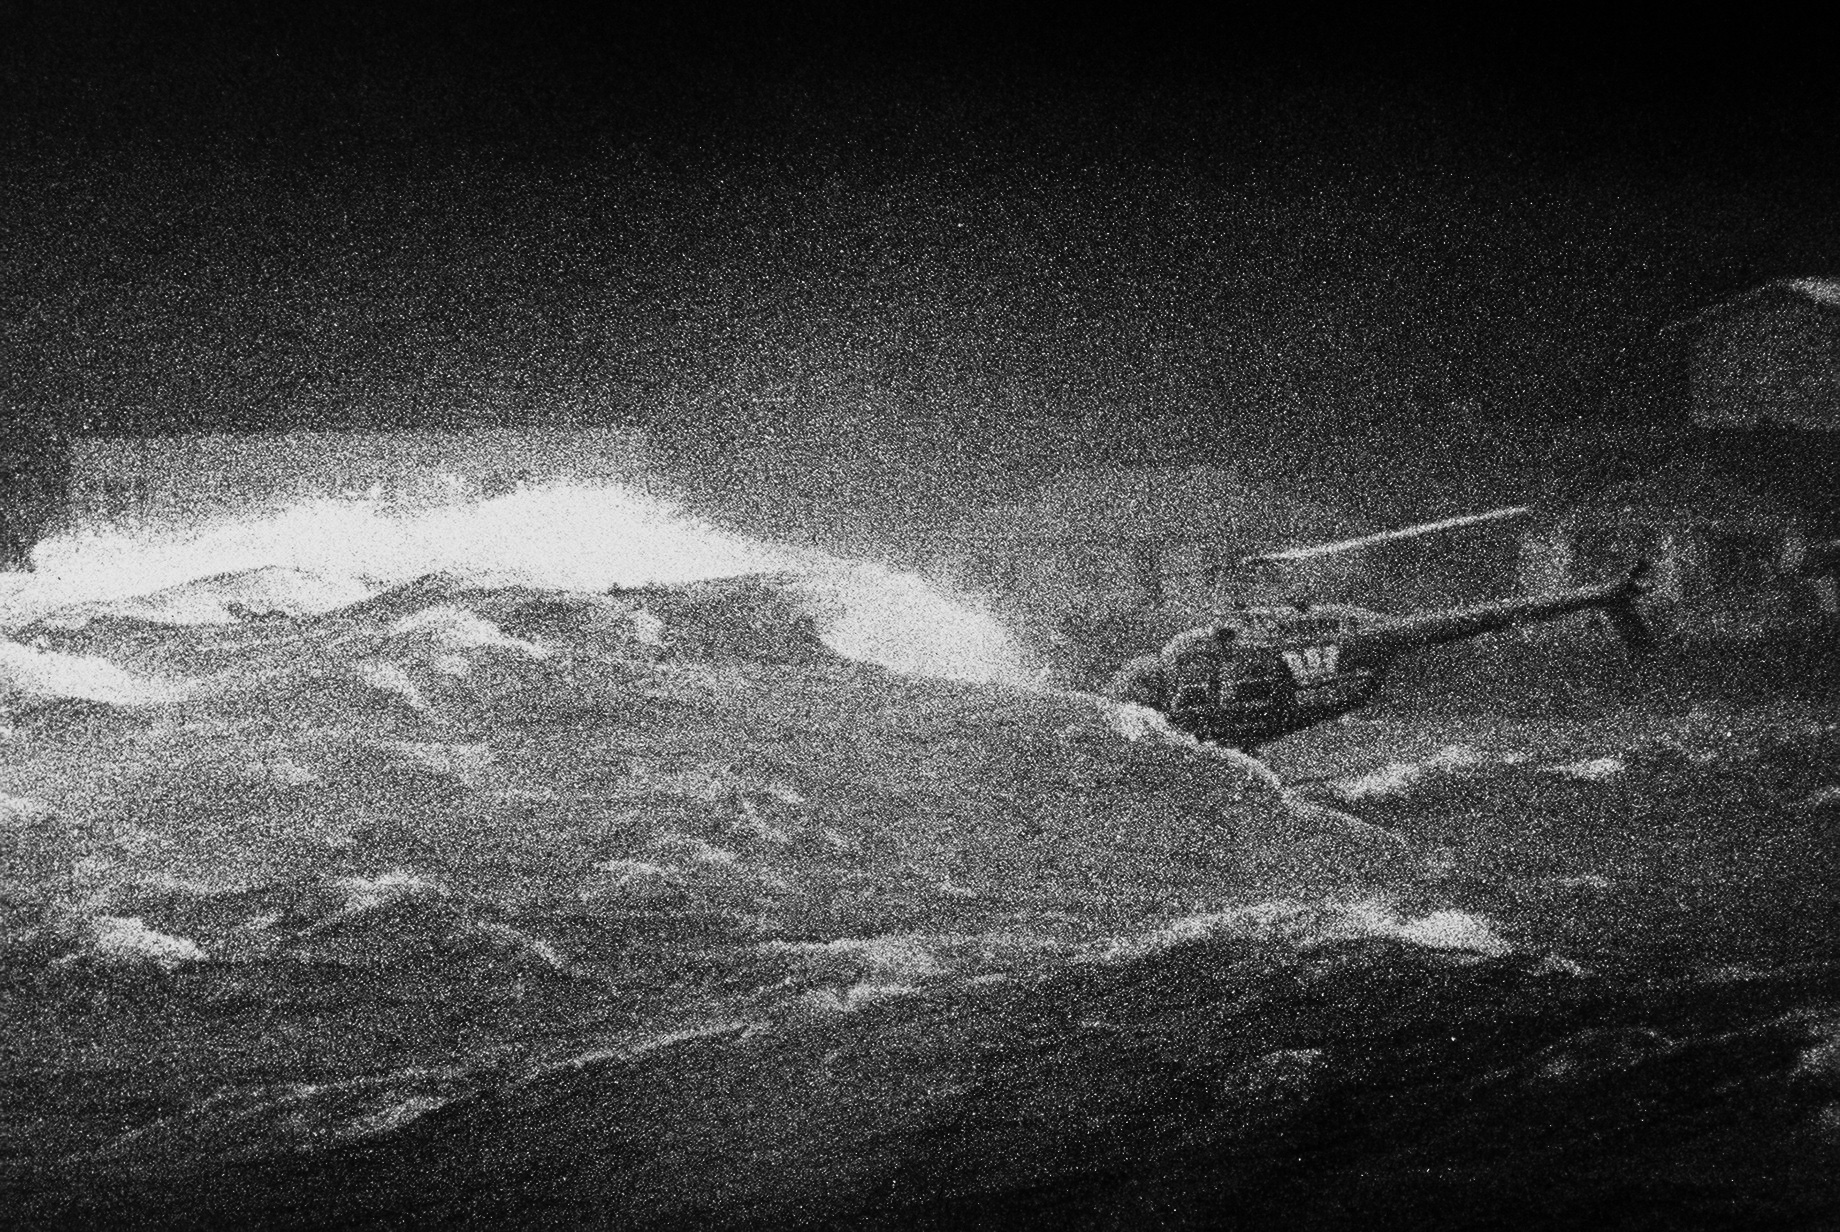 Westpac Rescue Helicopter hovering low over wild sea